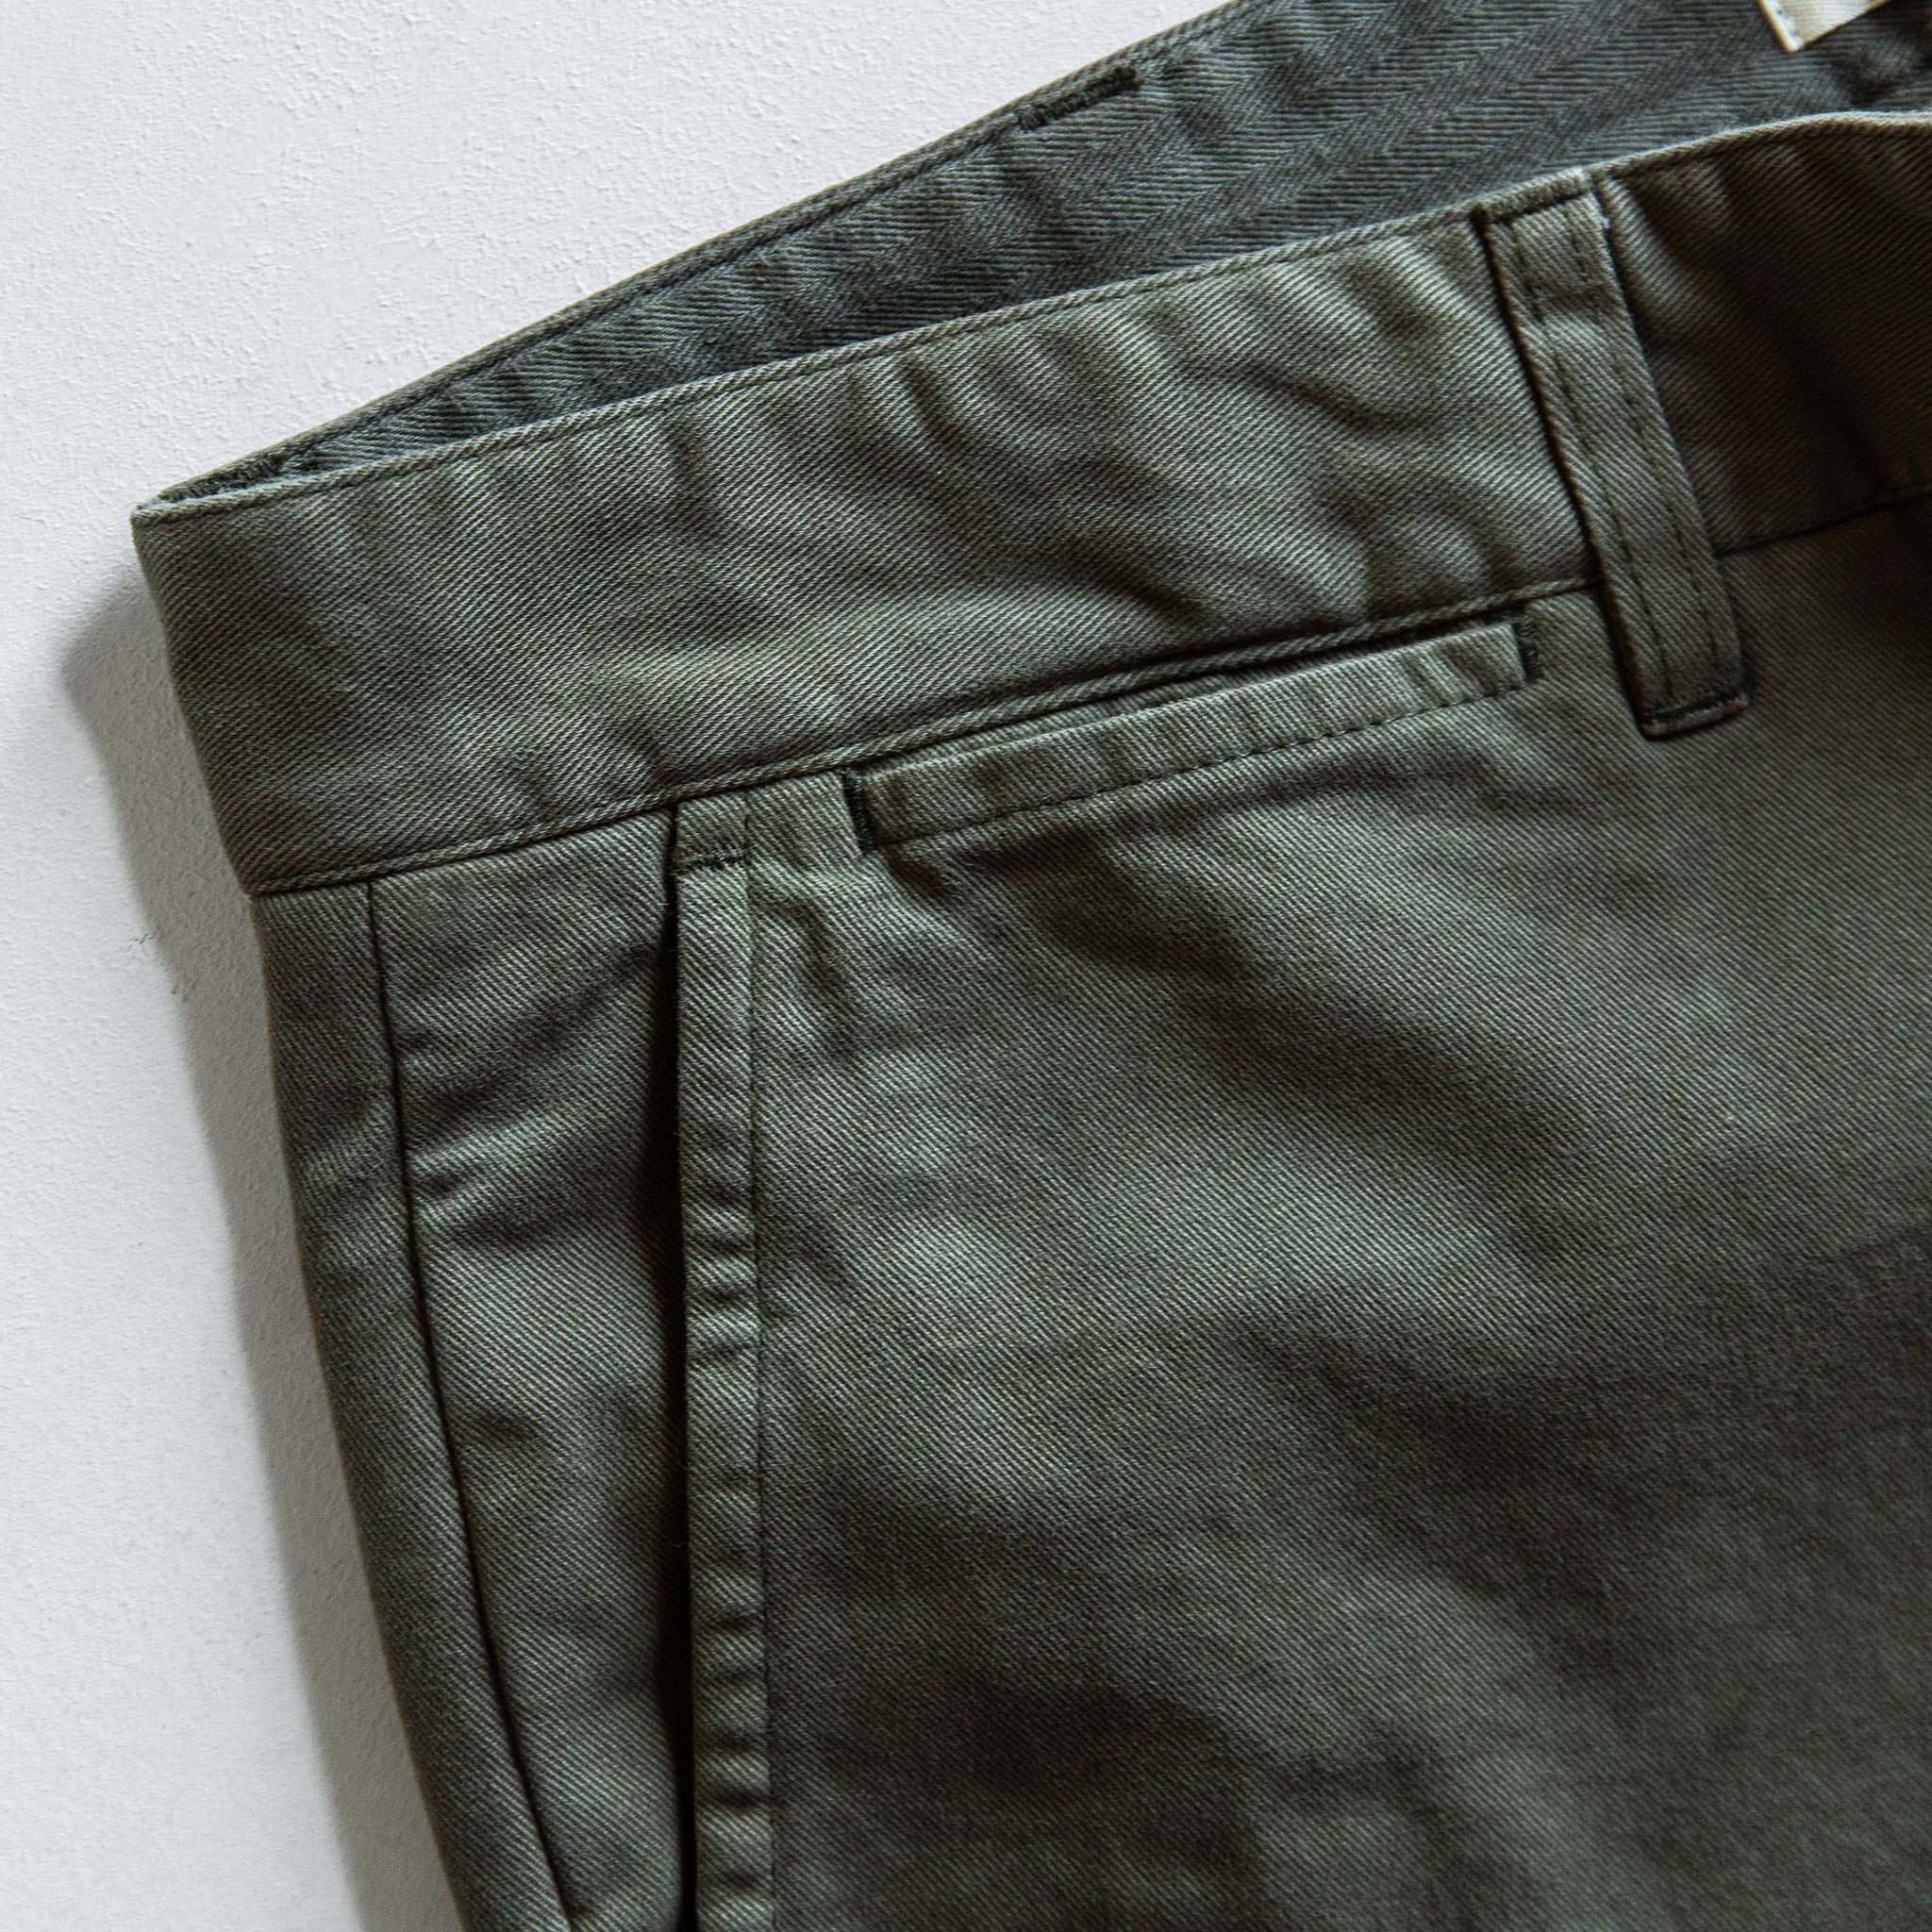 The. Slim Foundation Chino Pant in Organic Olive Green | Taylor Stitch